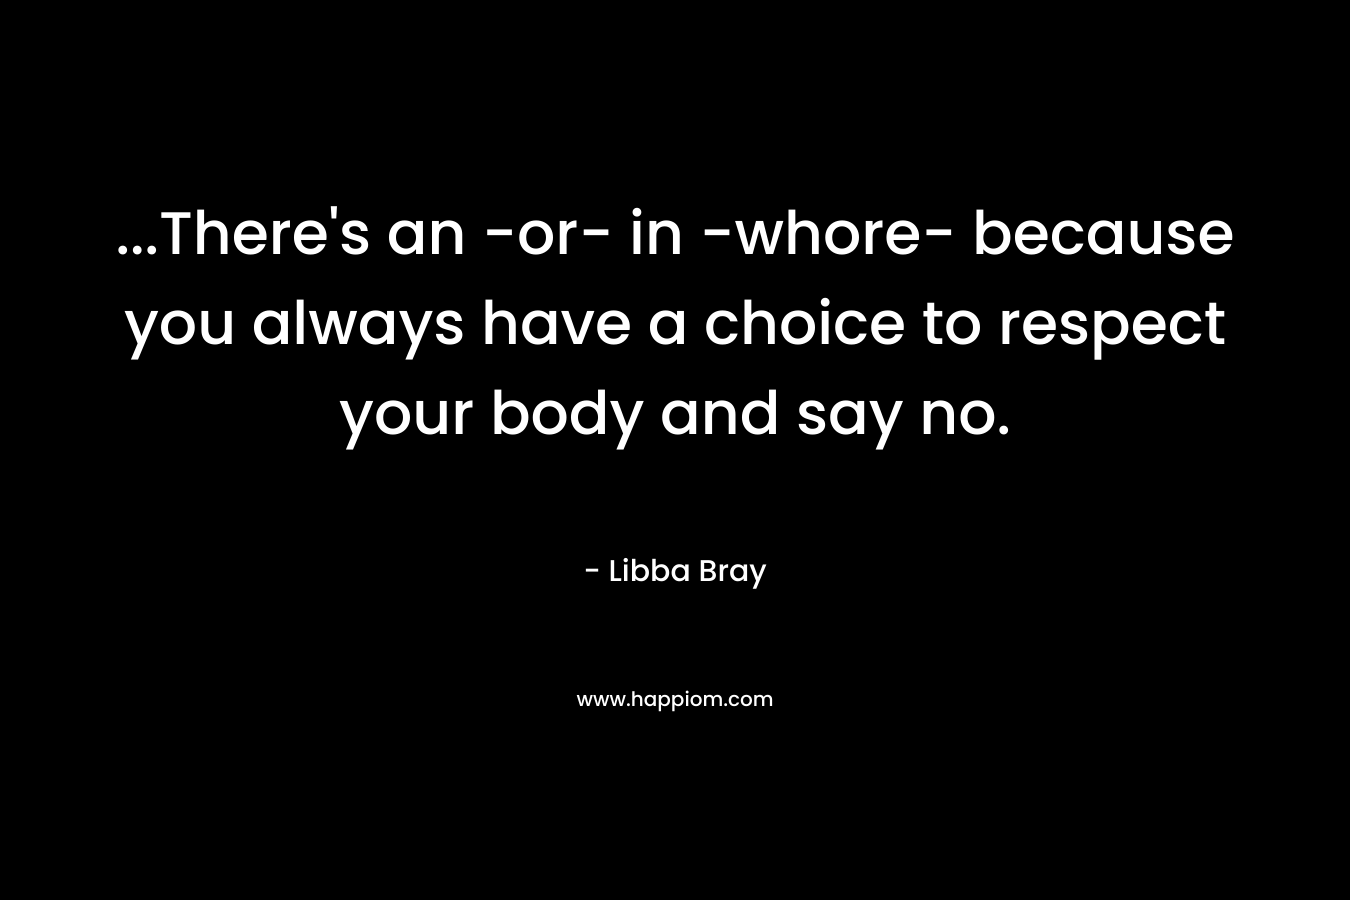 …There’s an -or- in -whore- because you always have a choice to respect your body and say no. – Libba Bray